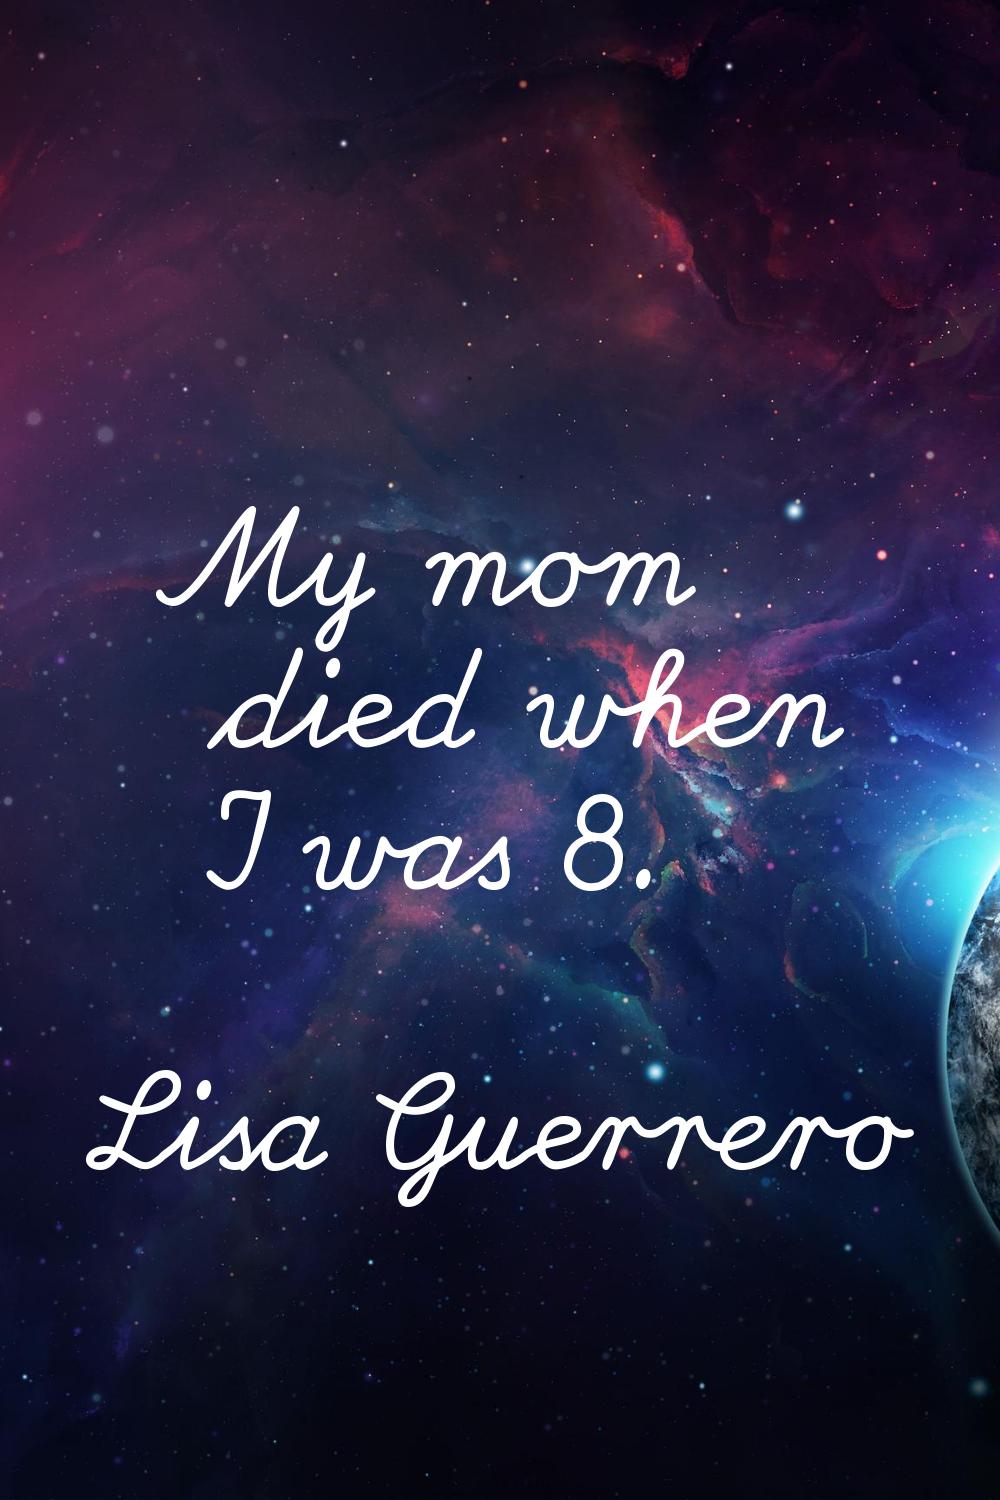 My mom died when I was 8.